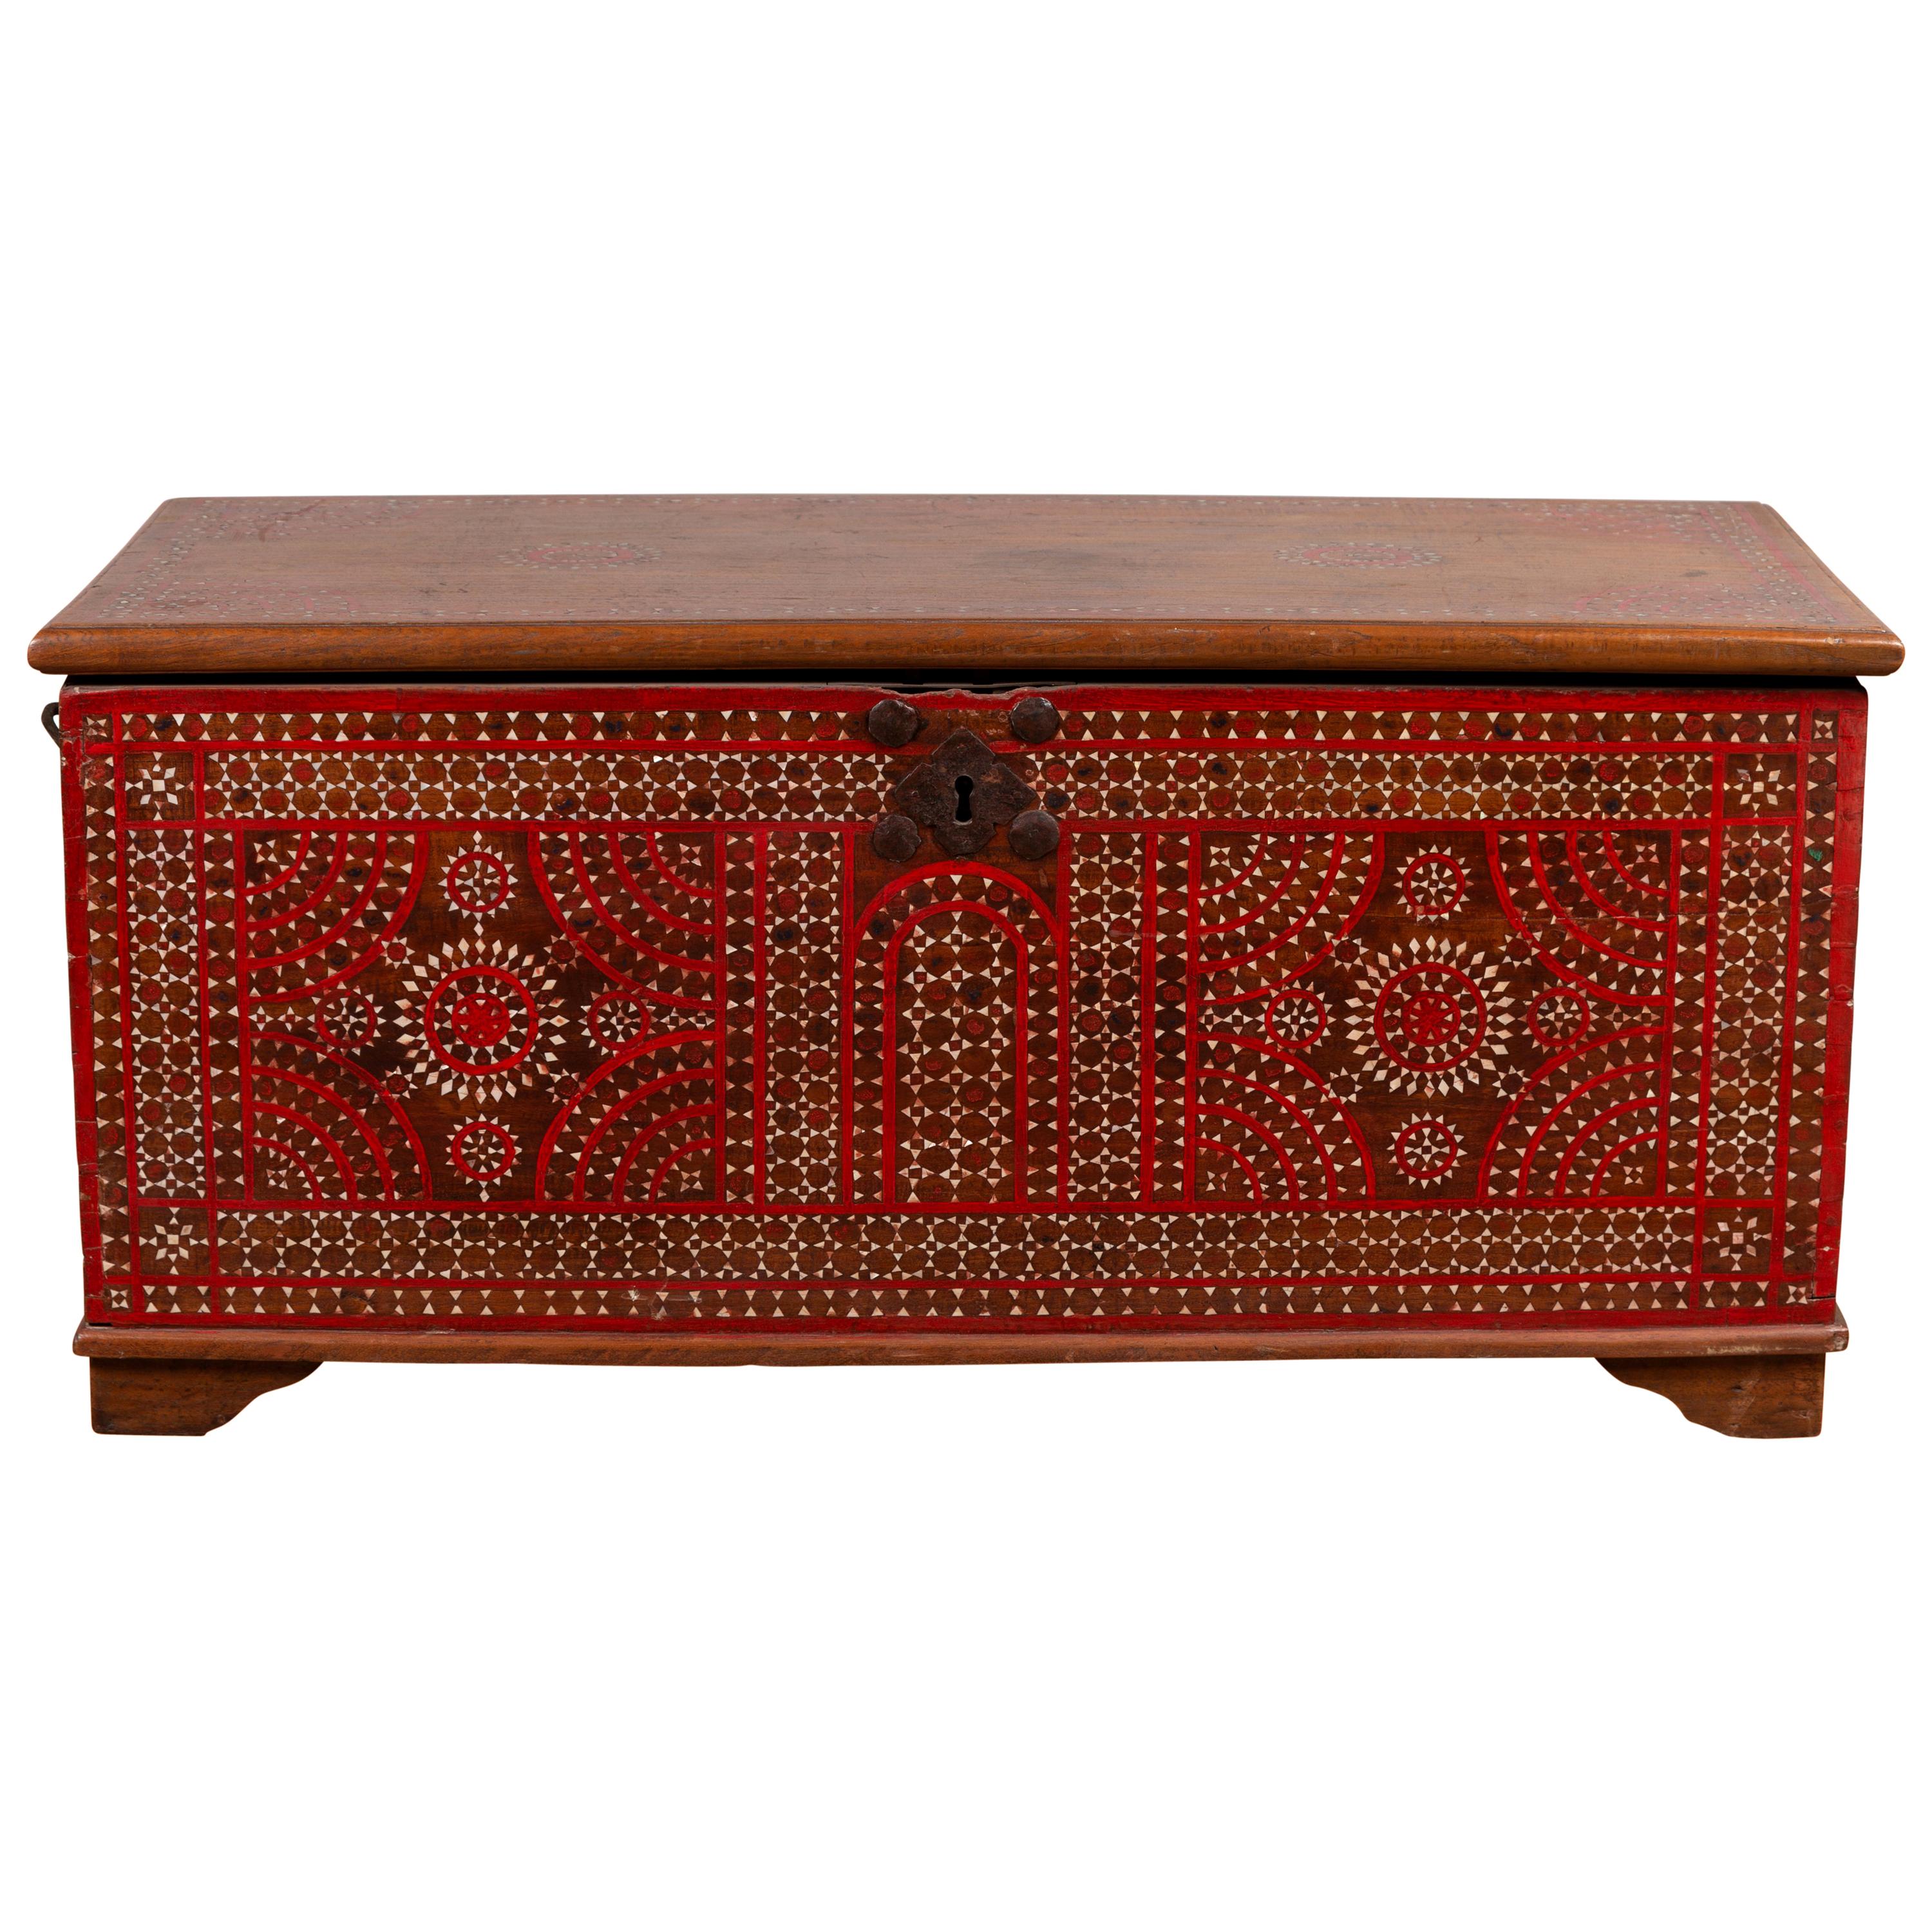 Antique Madura Blanket Chest with Red Geometric Decor and Inlaid Mother-of-pearl